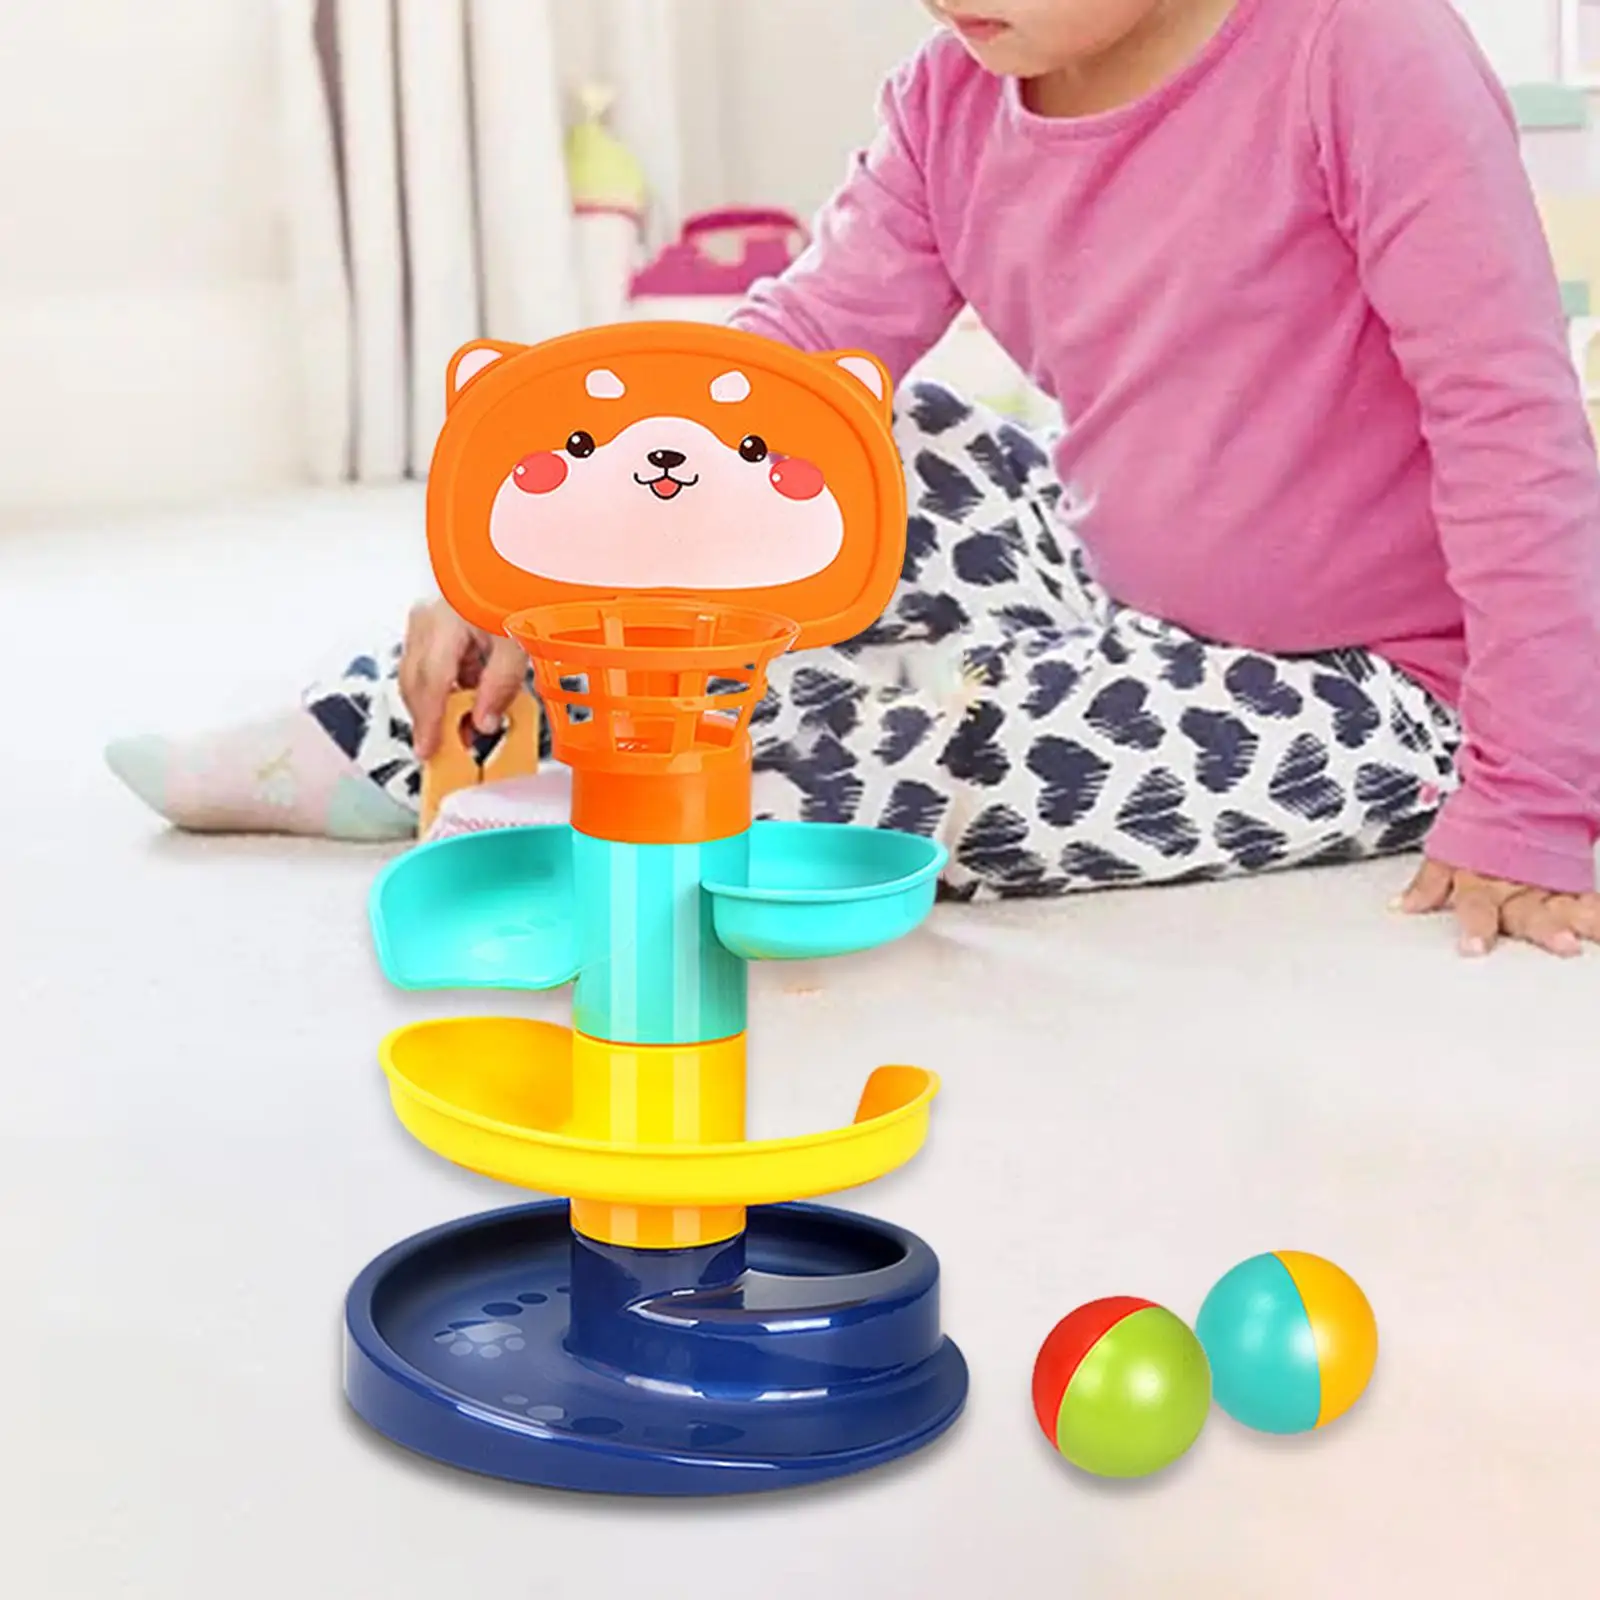 Ball Rolling Track Toy Funny Educational Toys Fine Motor Skills Ball Drop Toys for Kids Toys Gifts Baby Party Favors Preschool 2